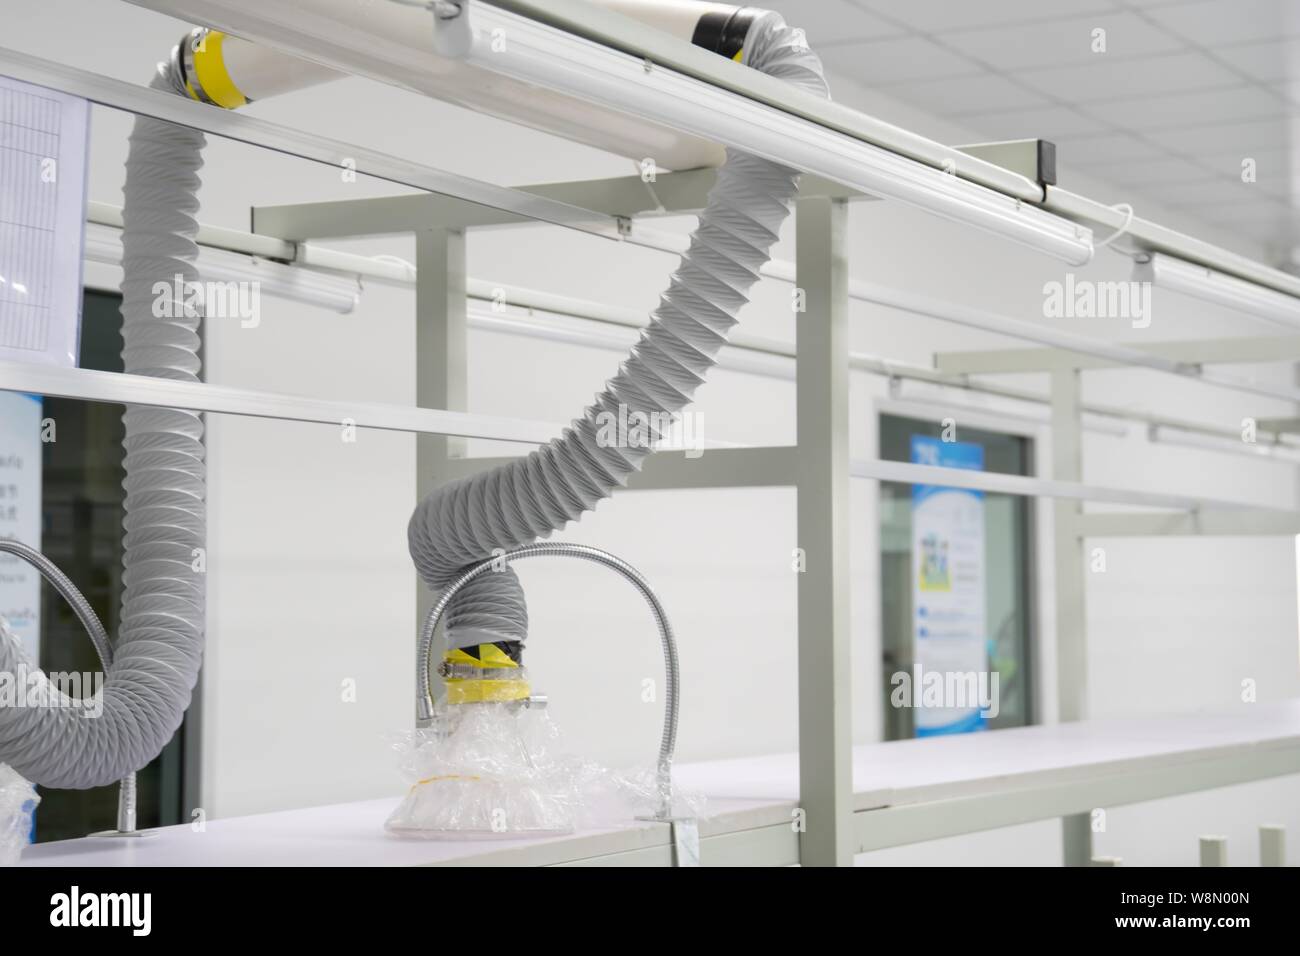 exhaust hood for smoke and heat in assembly lines Stock Photo